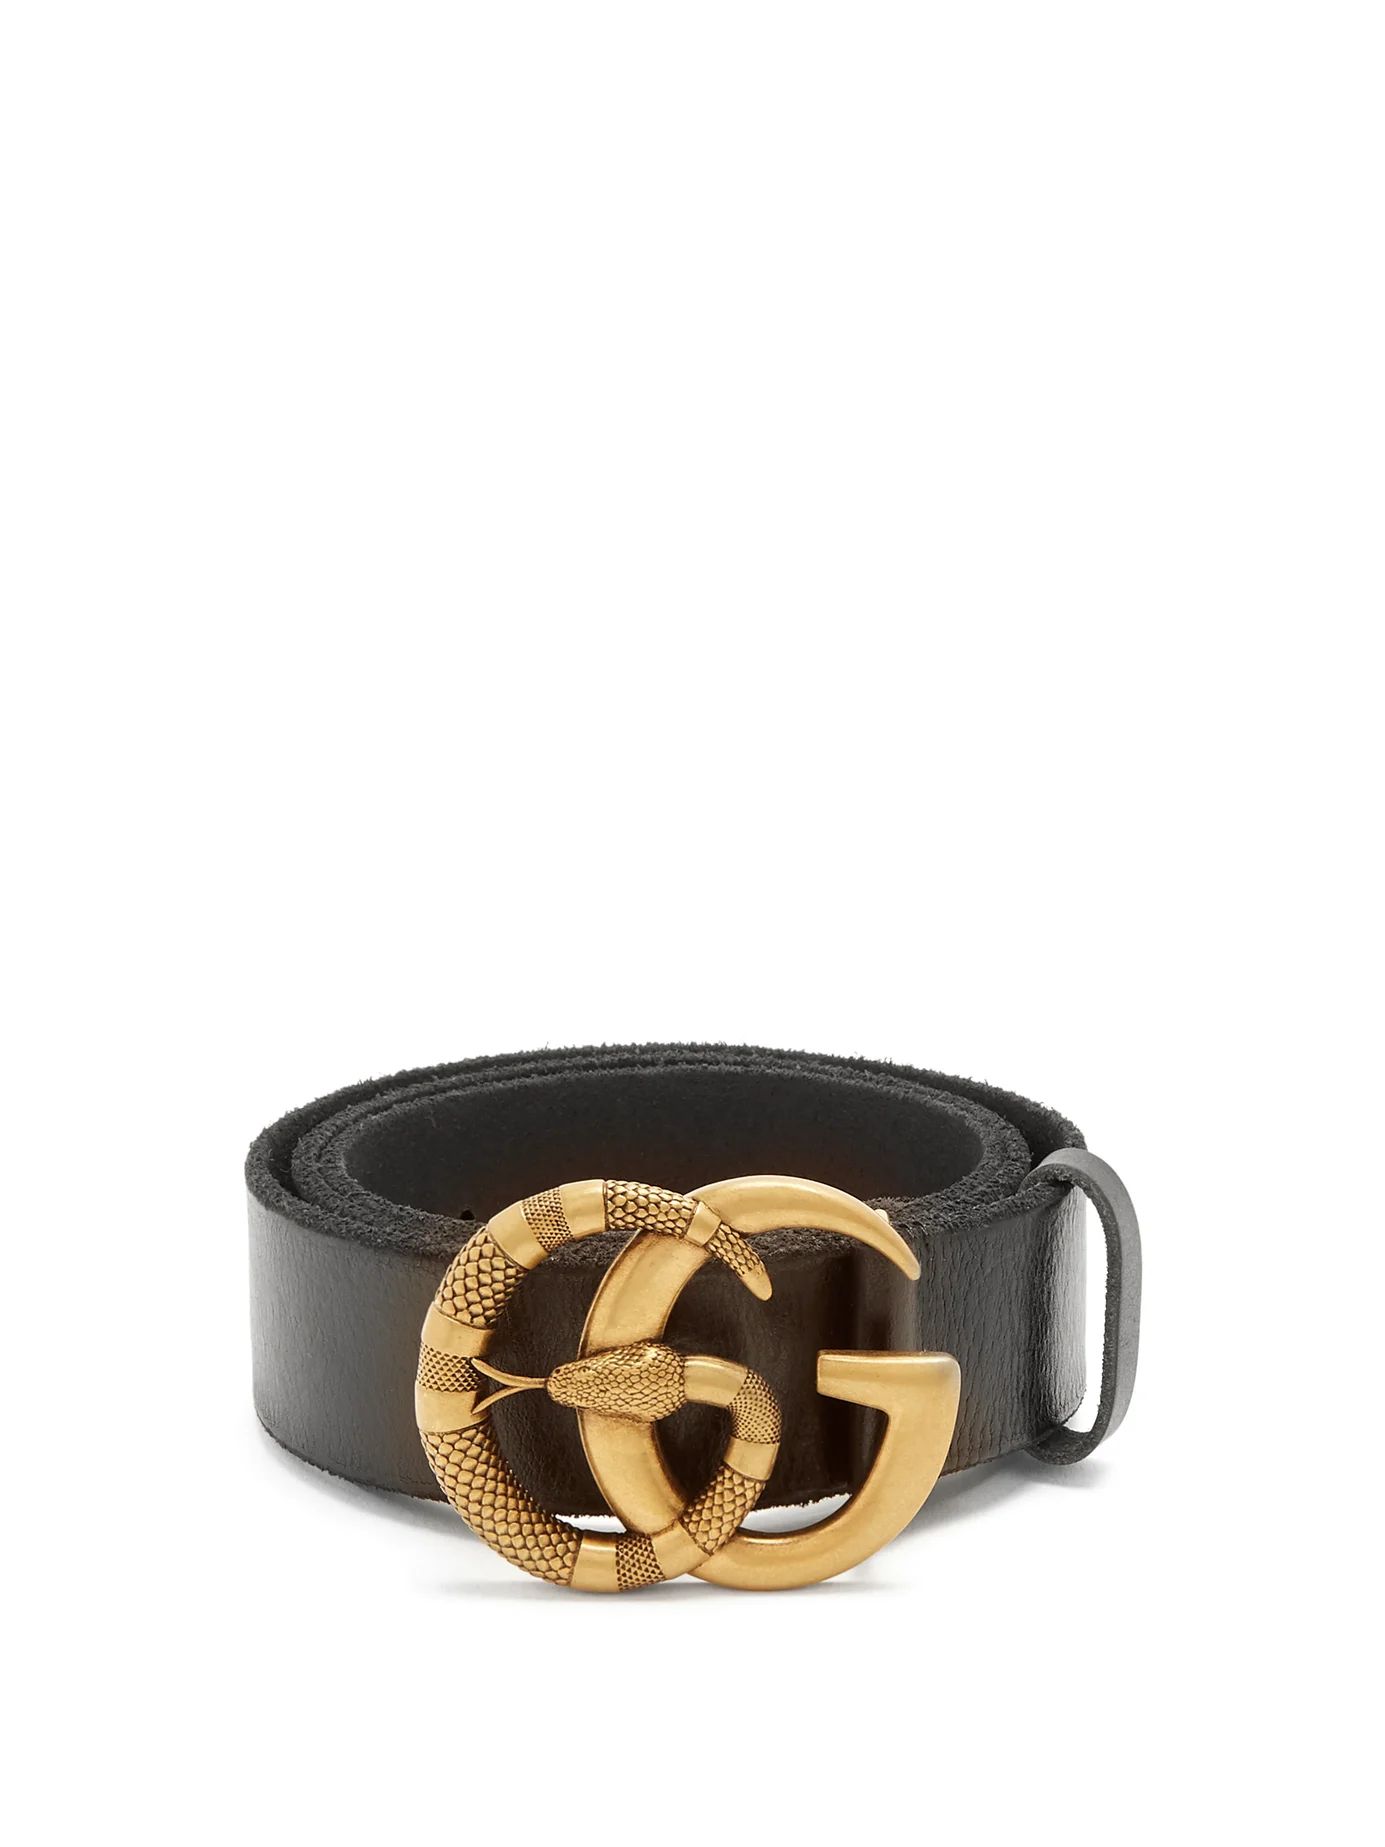 GG snake-buckle leather belt | Matches (US)